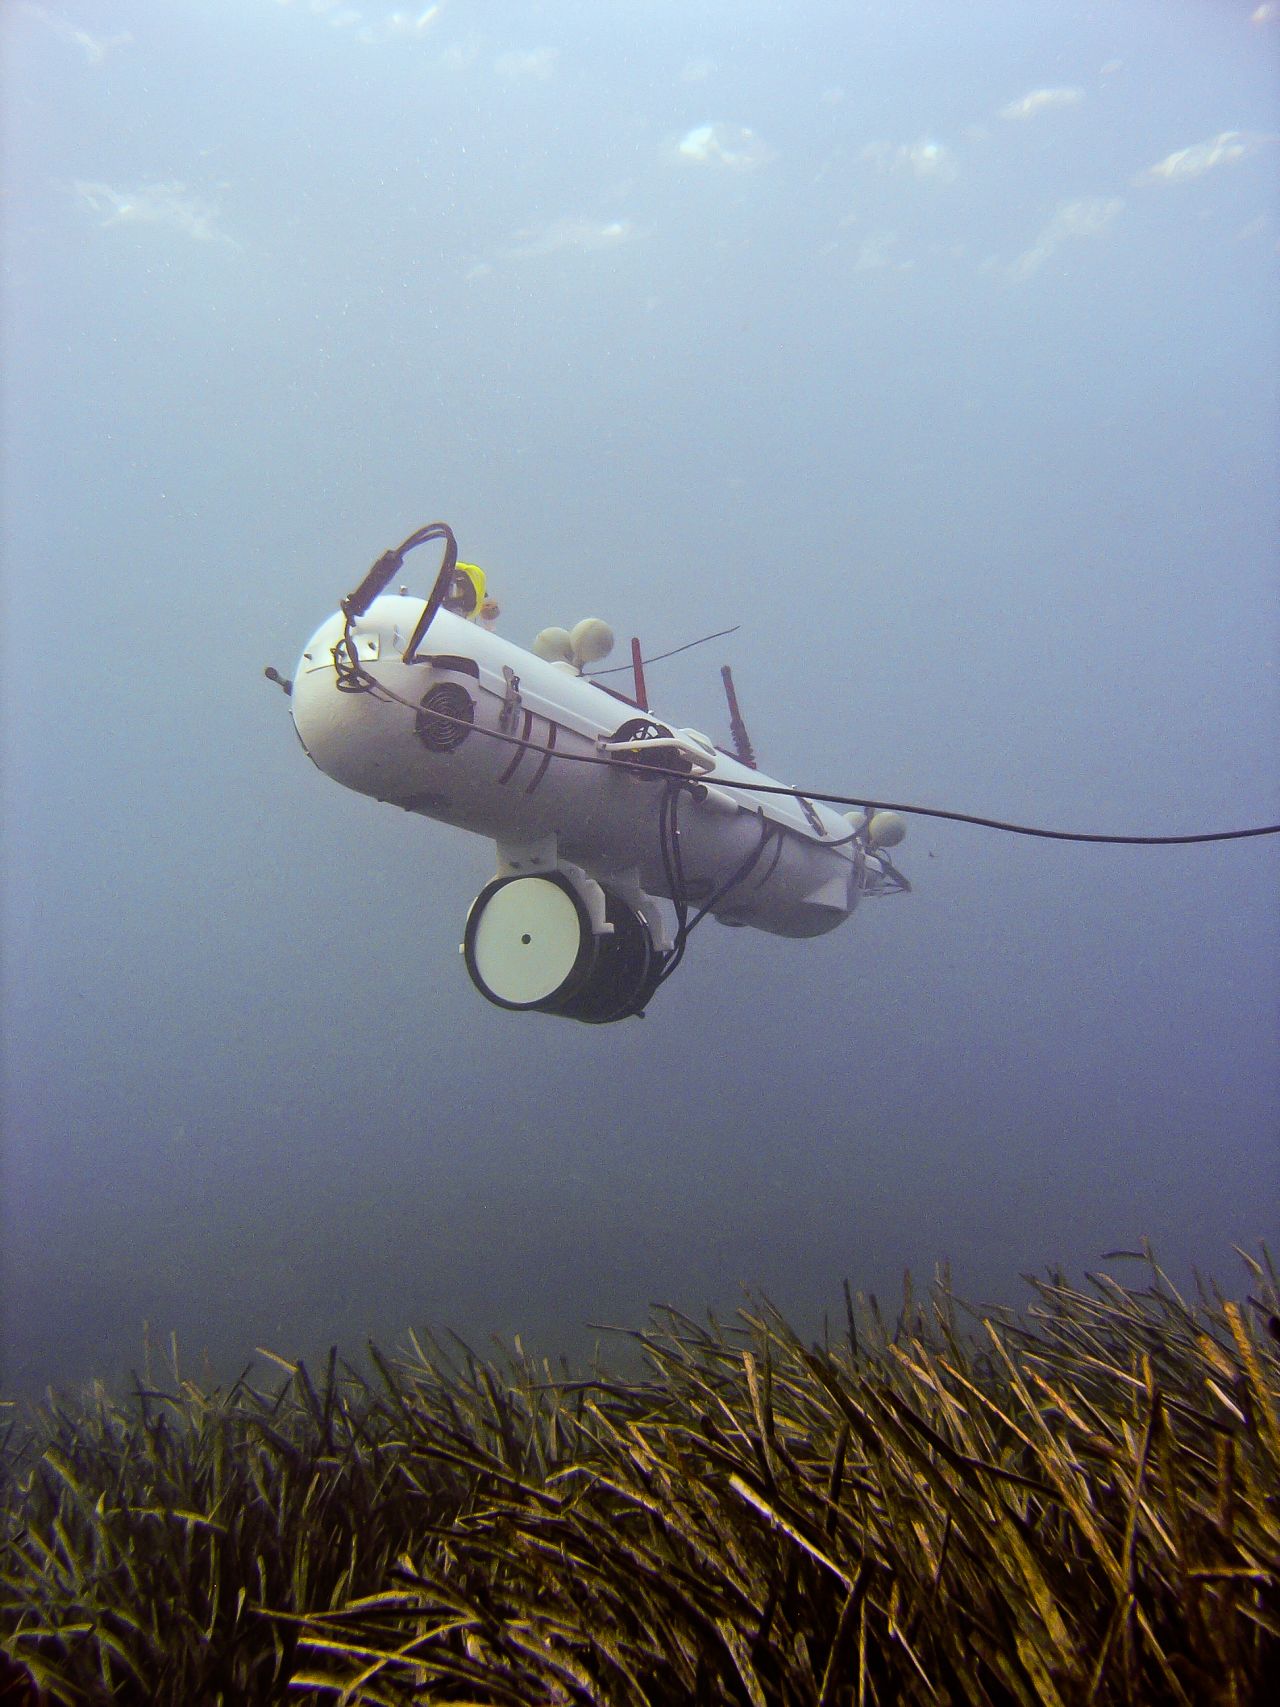 Proving that robot swarms can go anywhere, researchers from Scotland's <a href="http://osl.eps.hw.ac.uk/" target="_blank" target="_blank">Heriot-Watt University</a> have created Nessie: an autonomous underwater vehicle capable of diving into deep water to <a href="http://www.hw.ac.uk/news-events/news/coral-reefs.htm" target="_blank" target="_blank">help save the country's endangered coral reefs</a>. A swarm 'team' will replace human divers who currently reassemble damaged coral with the hope that it will regrow.  Researchers take inspiration from the behavior of natural swarms of insects -- such as bees -- to collectively maintain complex structures.